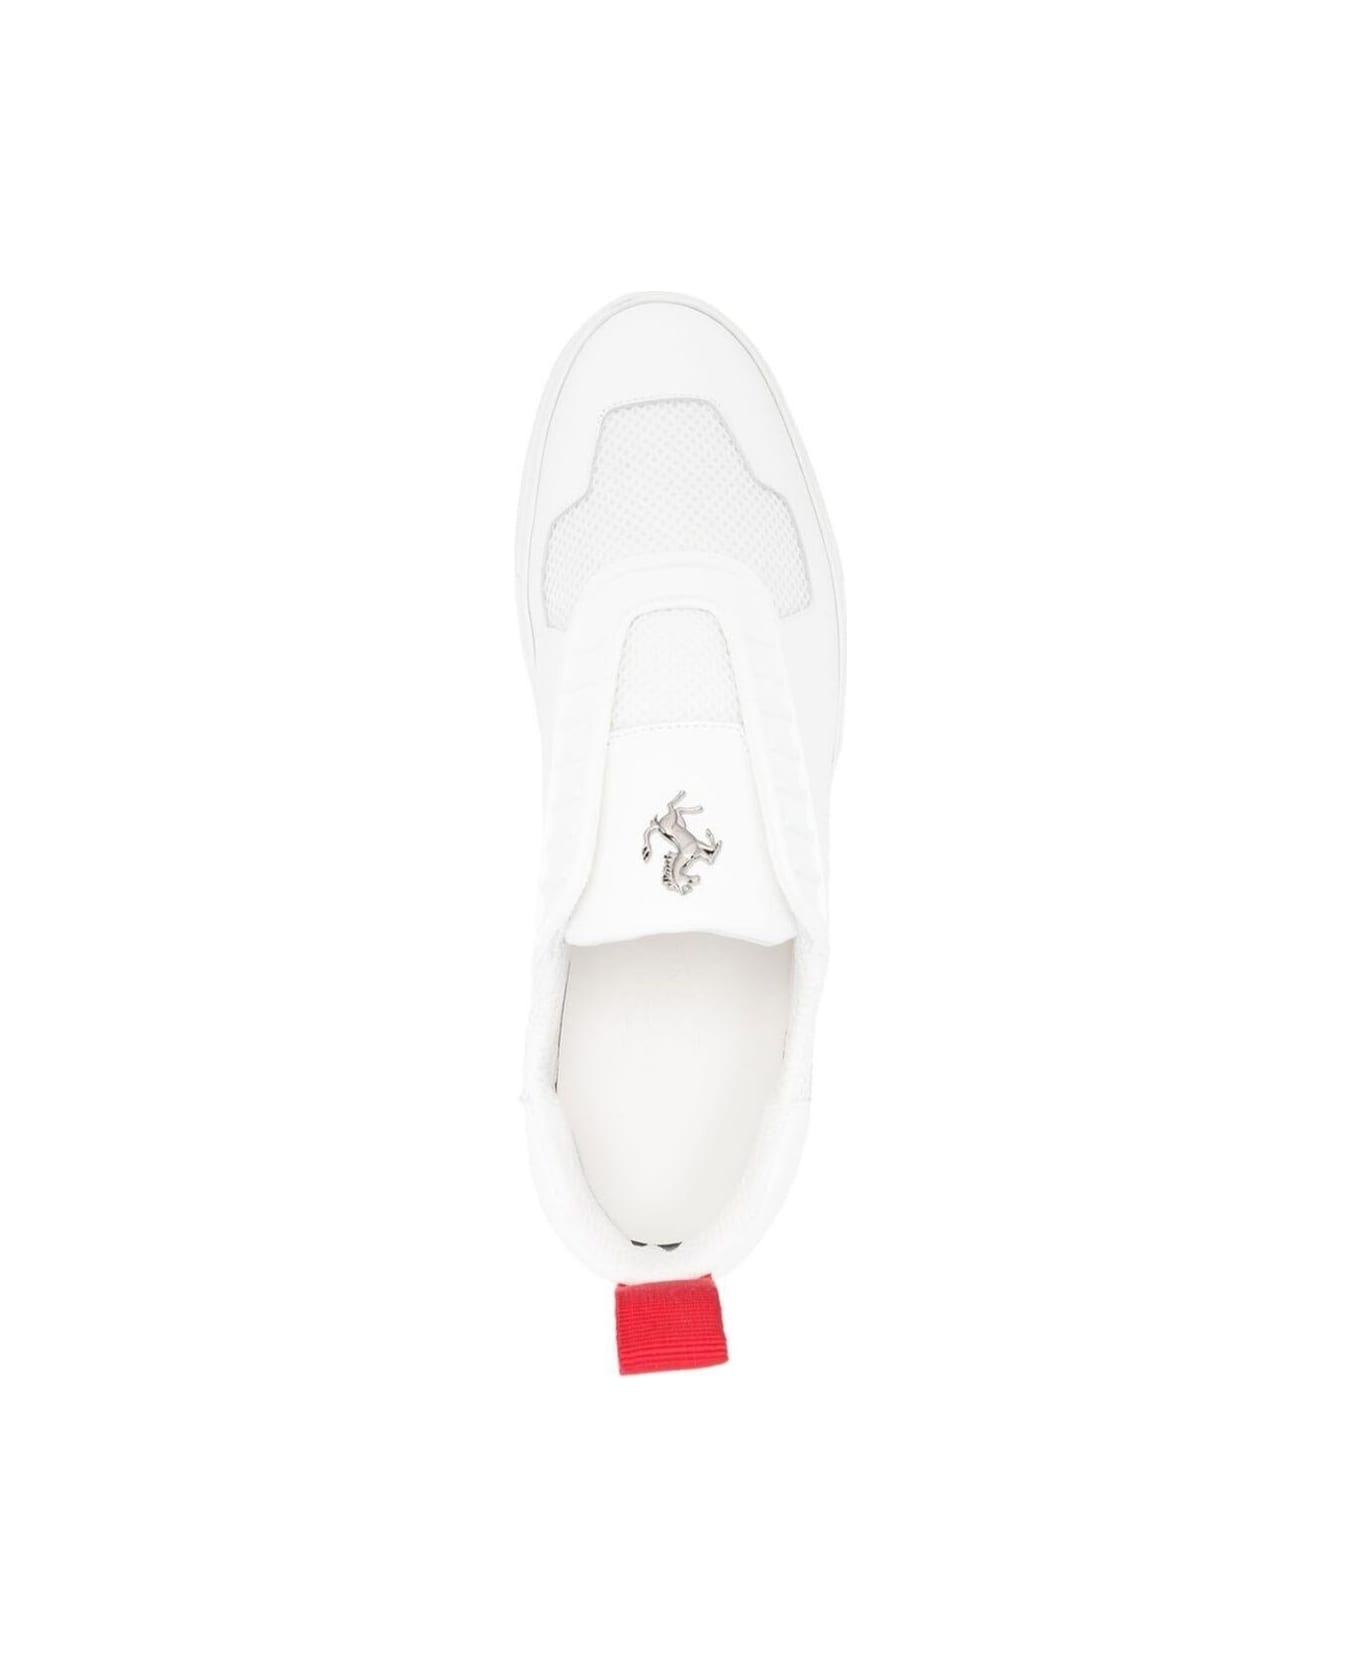 Ferrari White Sneakers With Riding Horse On Tongue In Leather Man Ferrari - White スニーカー